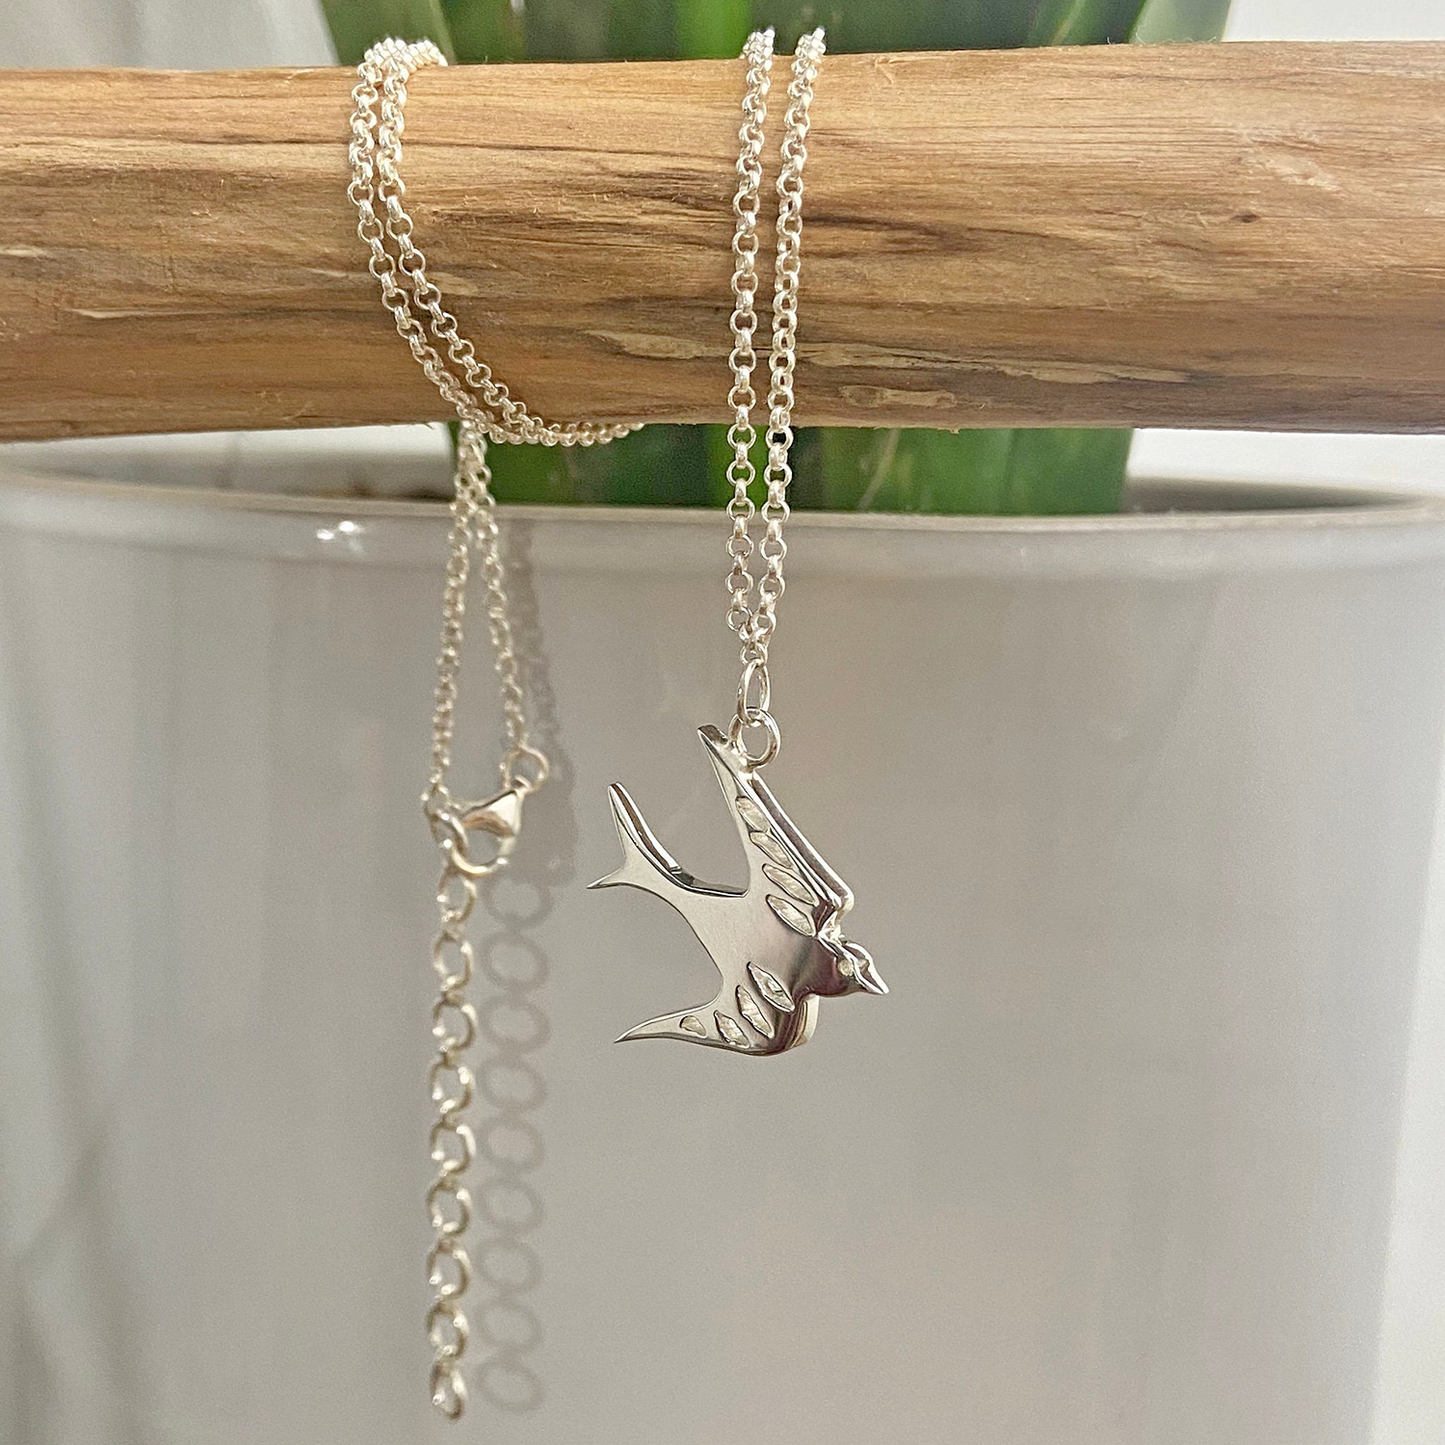 Ladies Swallow Necklace Pendant on a Chain